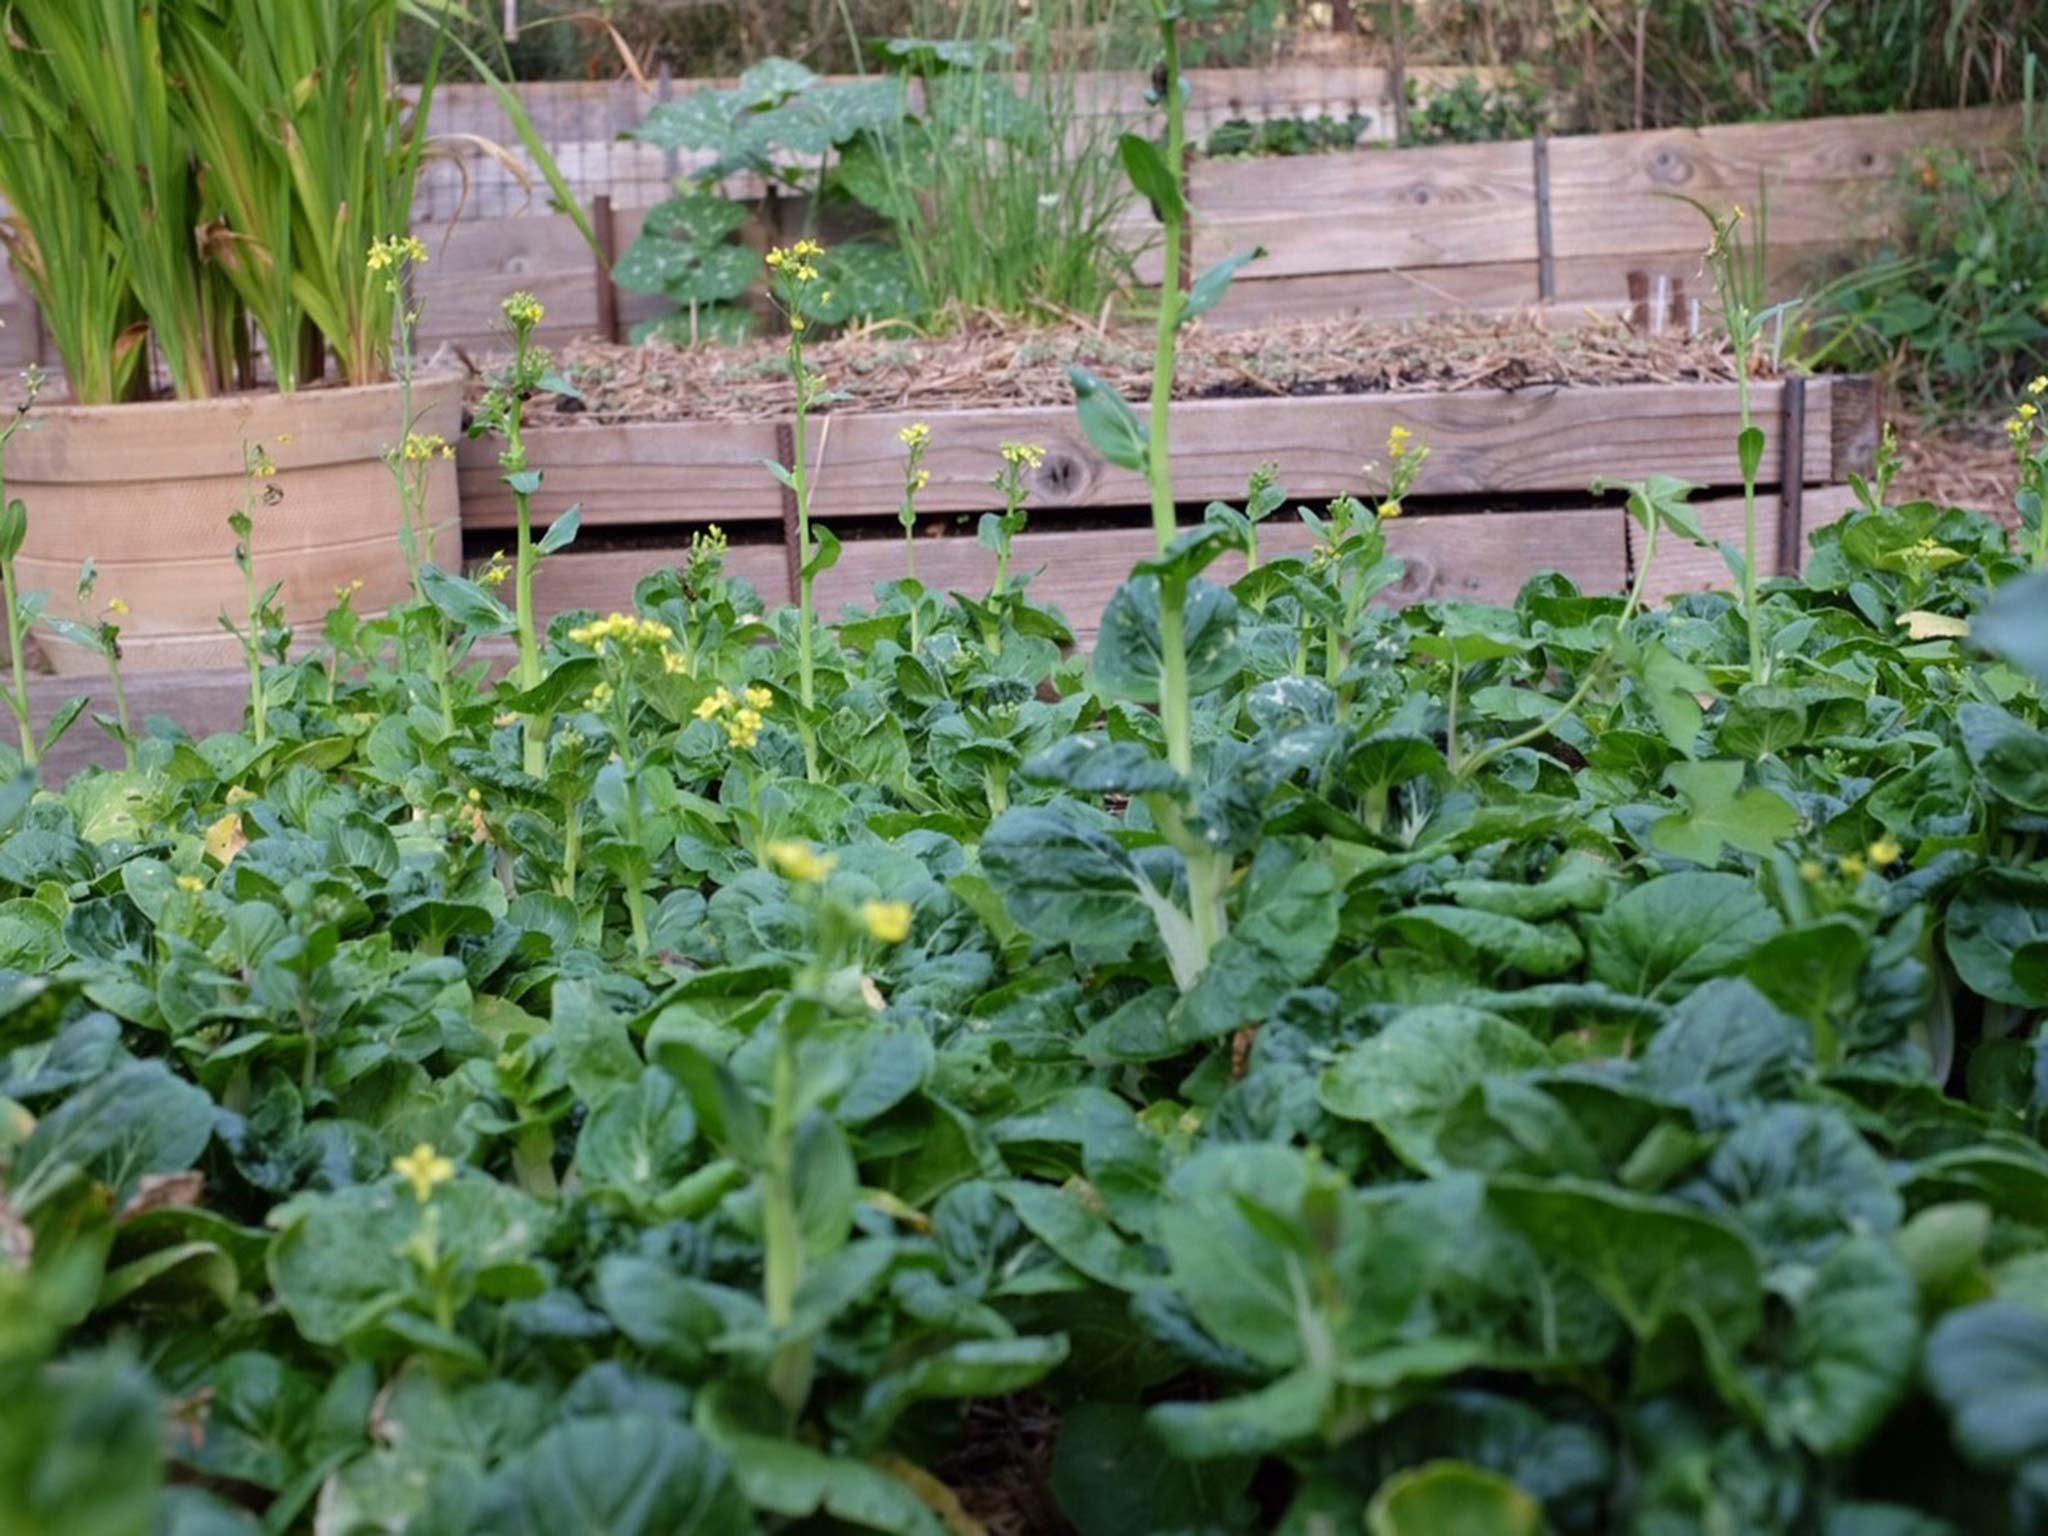 The author’s bok choy started to flower too soon